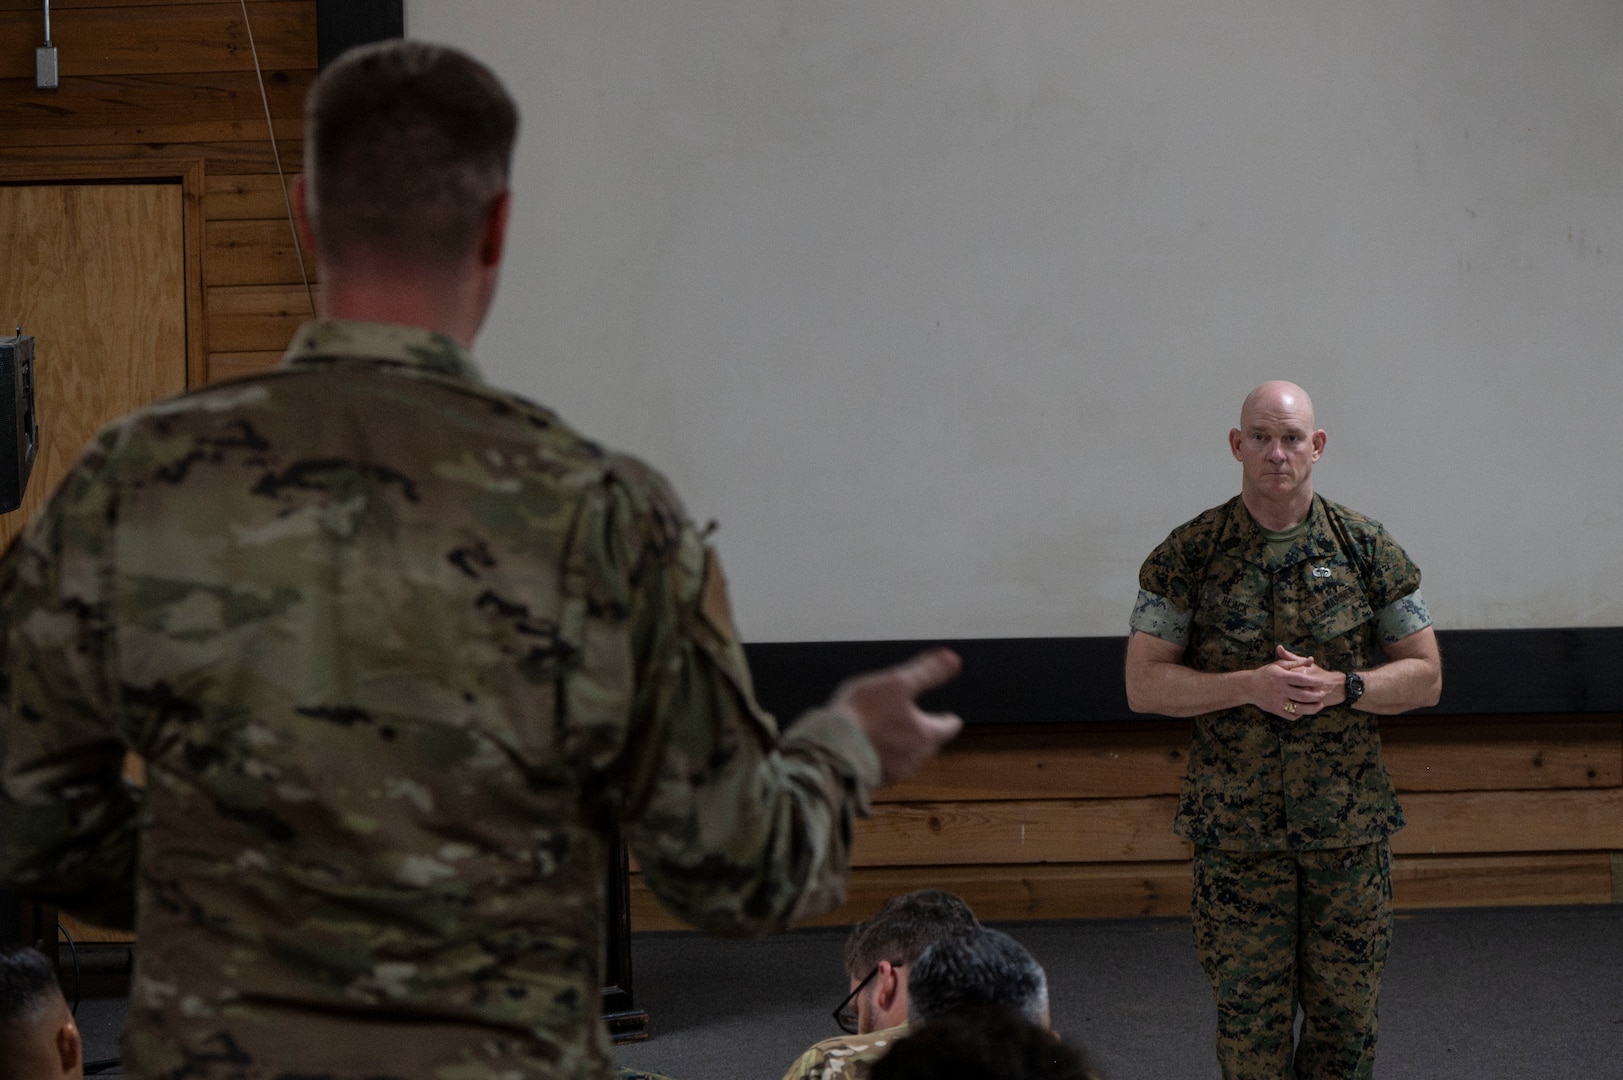 A photo of a service member standing up and asking a question.